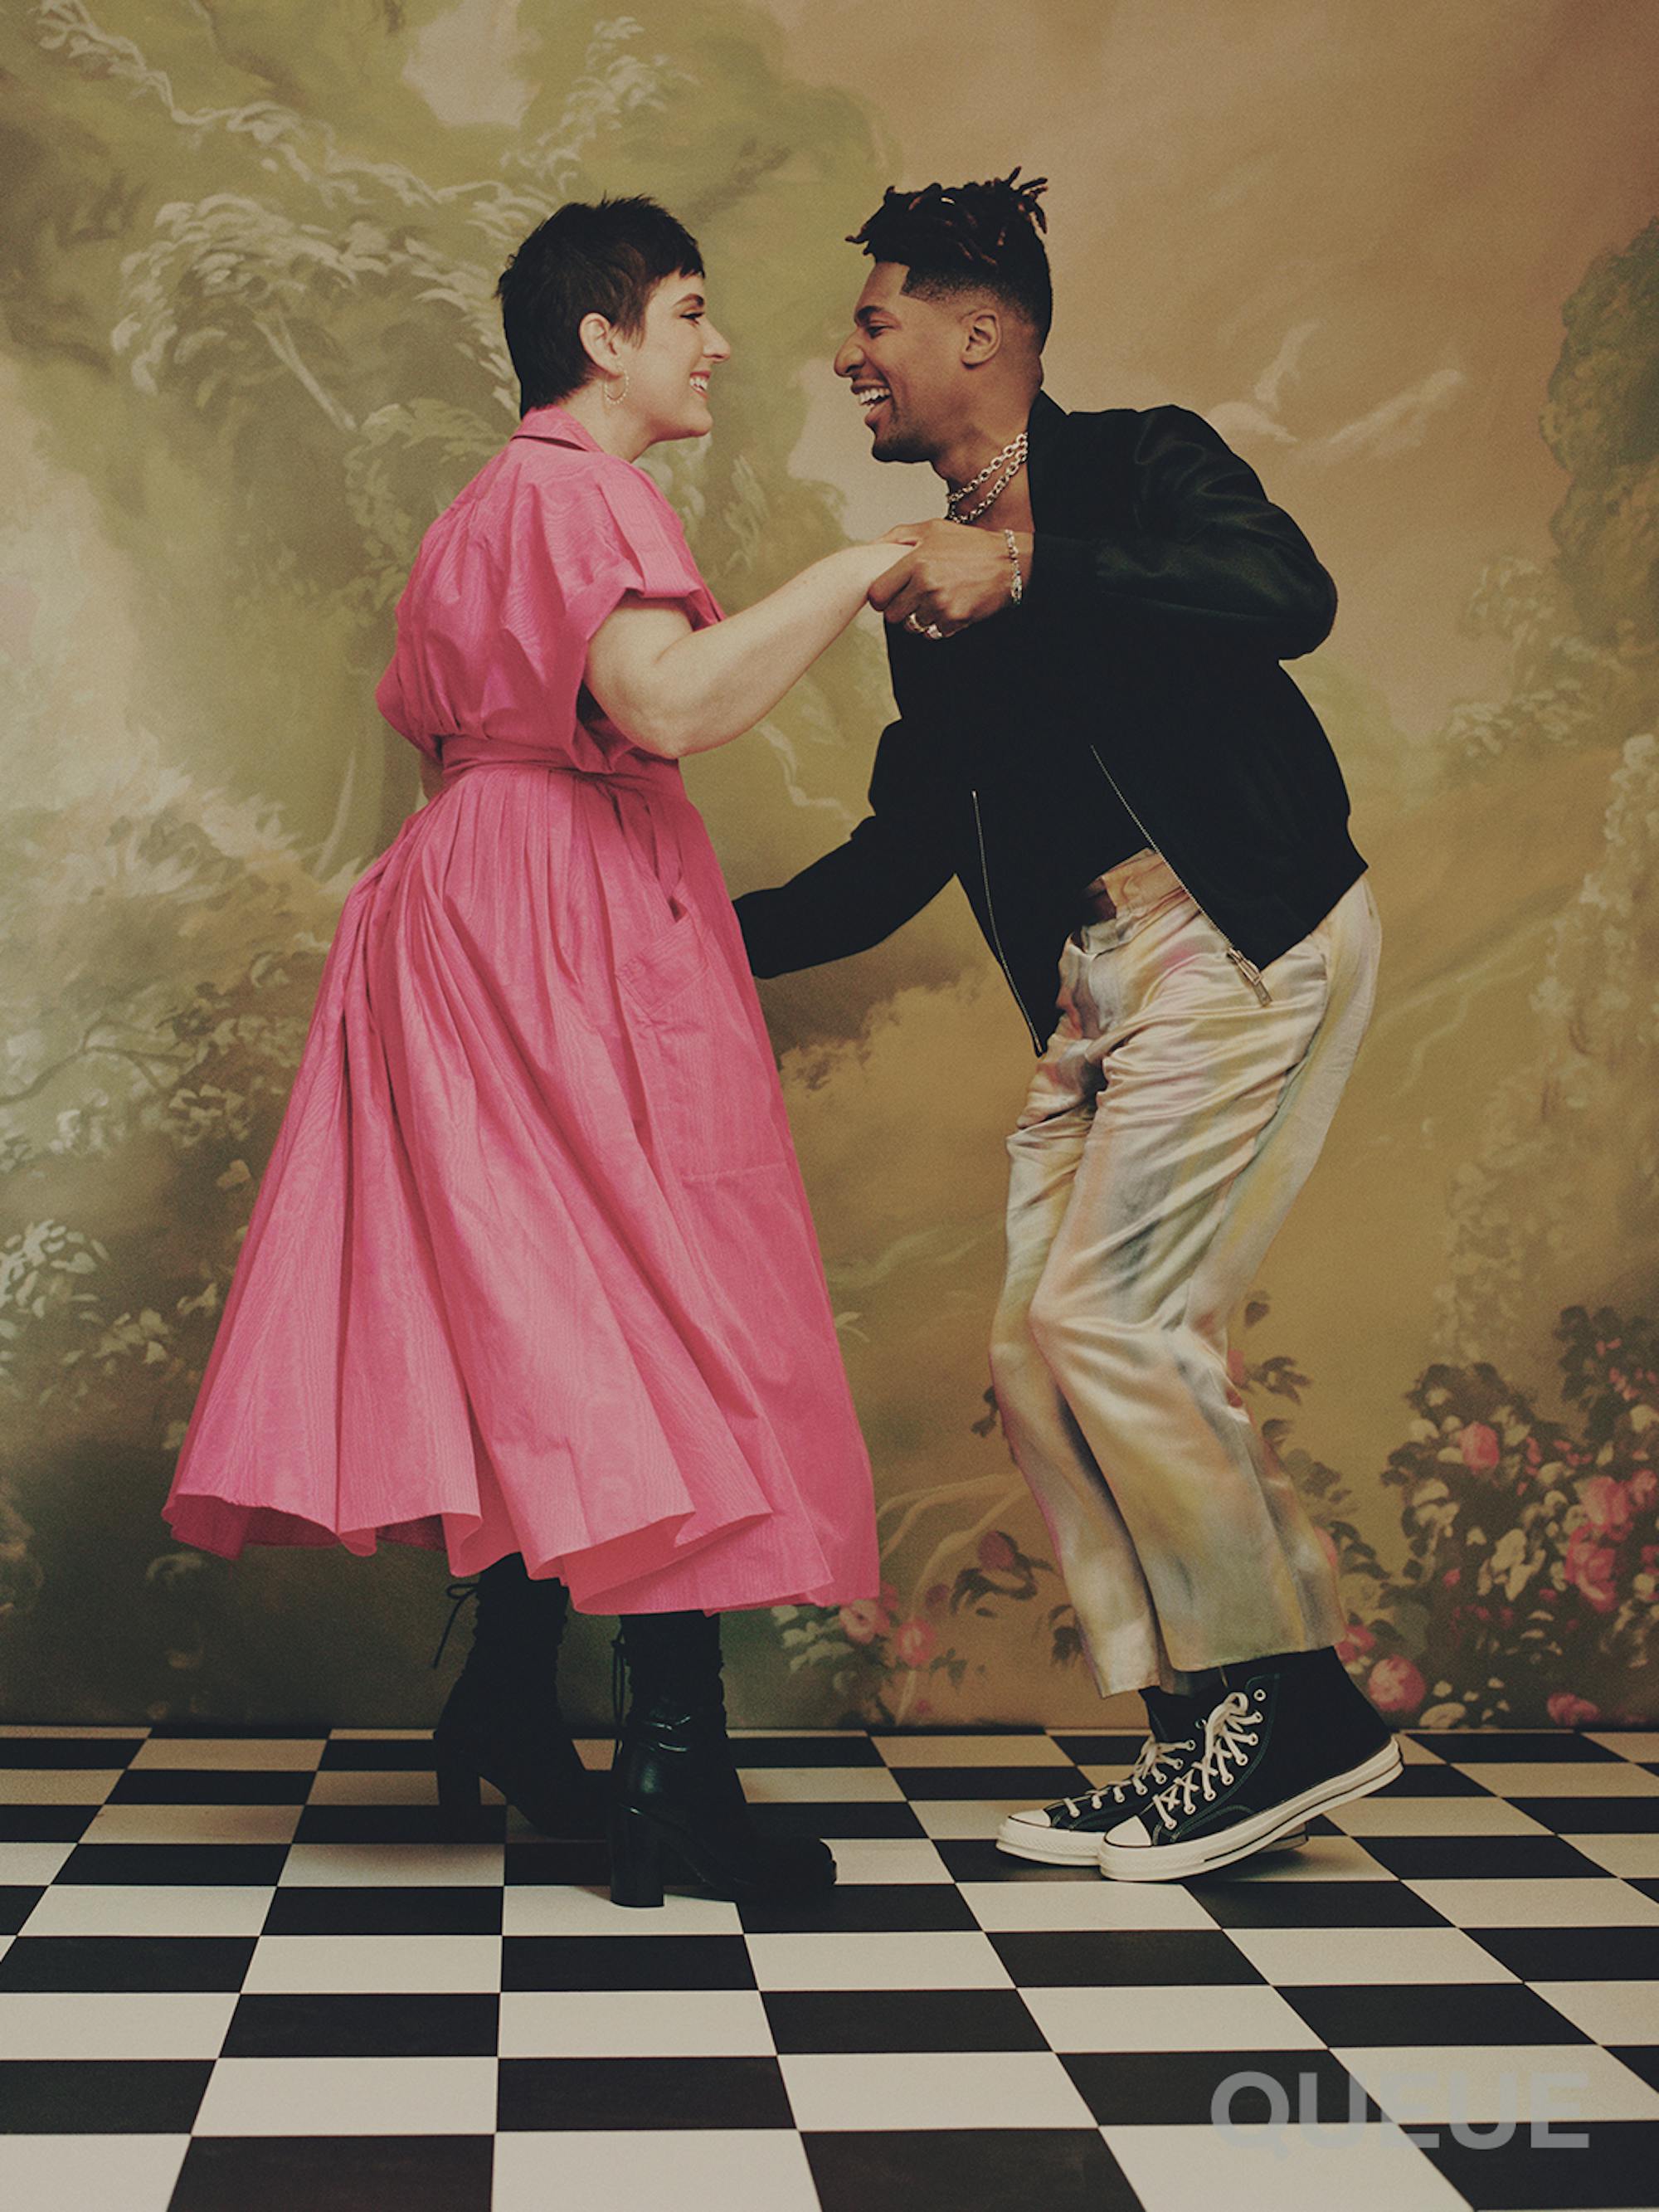 Suleika Jaouad and Jon Batiste dance on a black-and-white checkered ground.